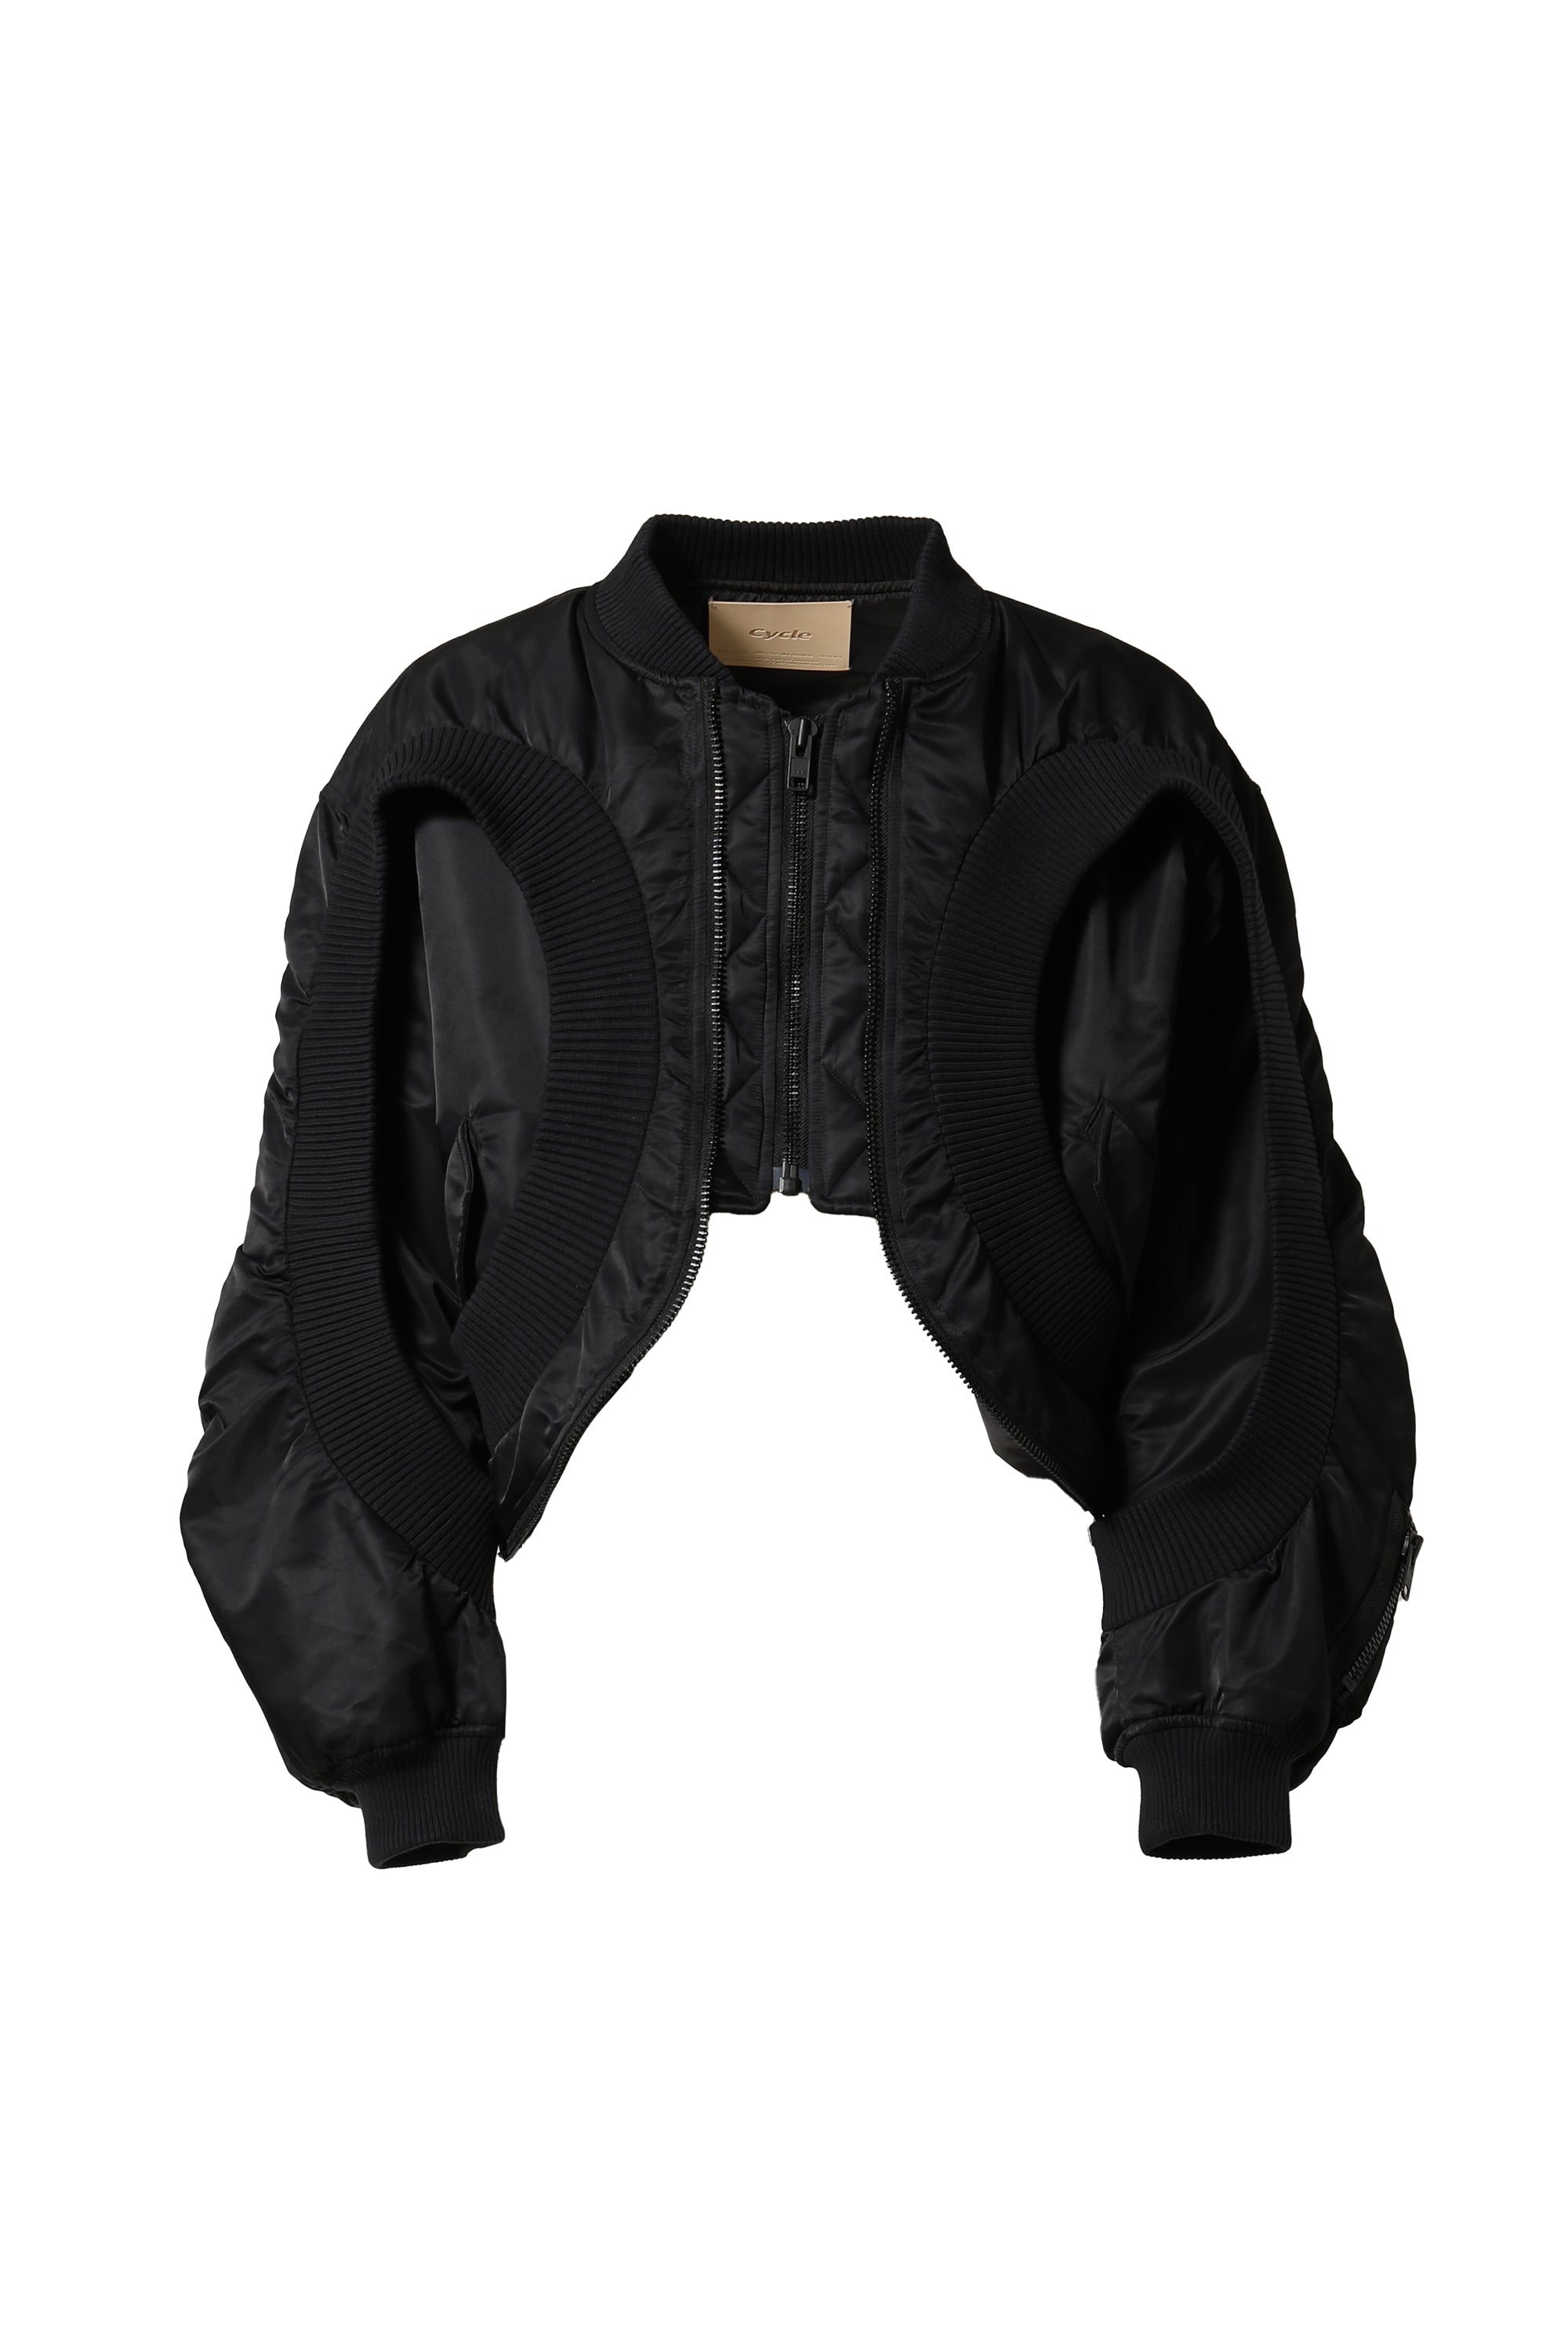 cycle by MYOB サイクル FW23 NYLON MA-1 (EXCLUSIVE) / BLK ...